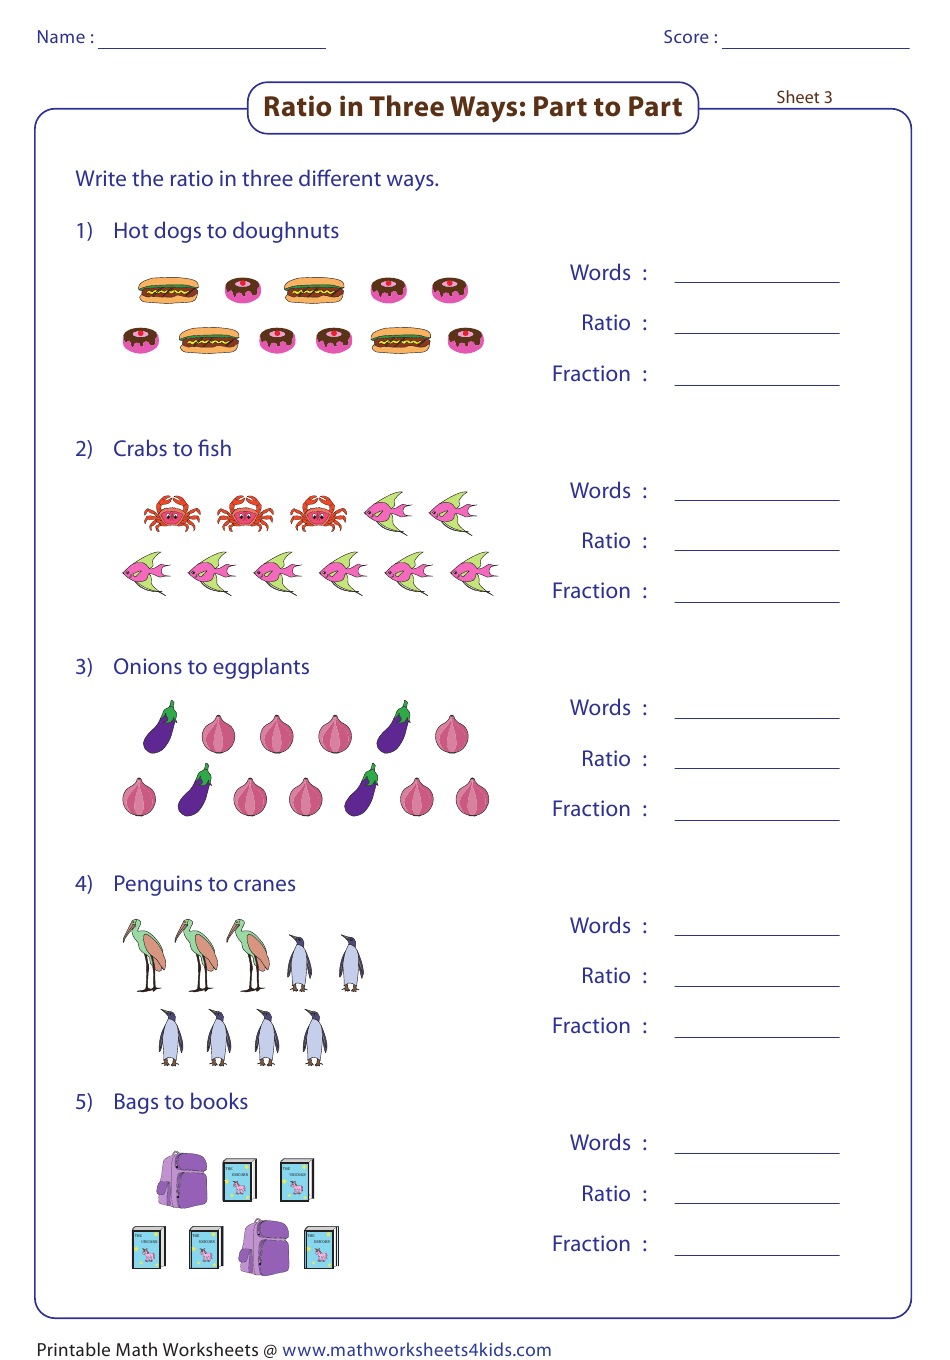 Writing Ratios In Different Ways Worksheet With Answer Key Download 